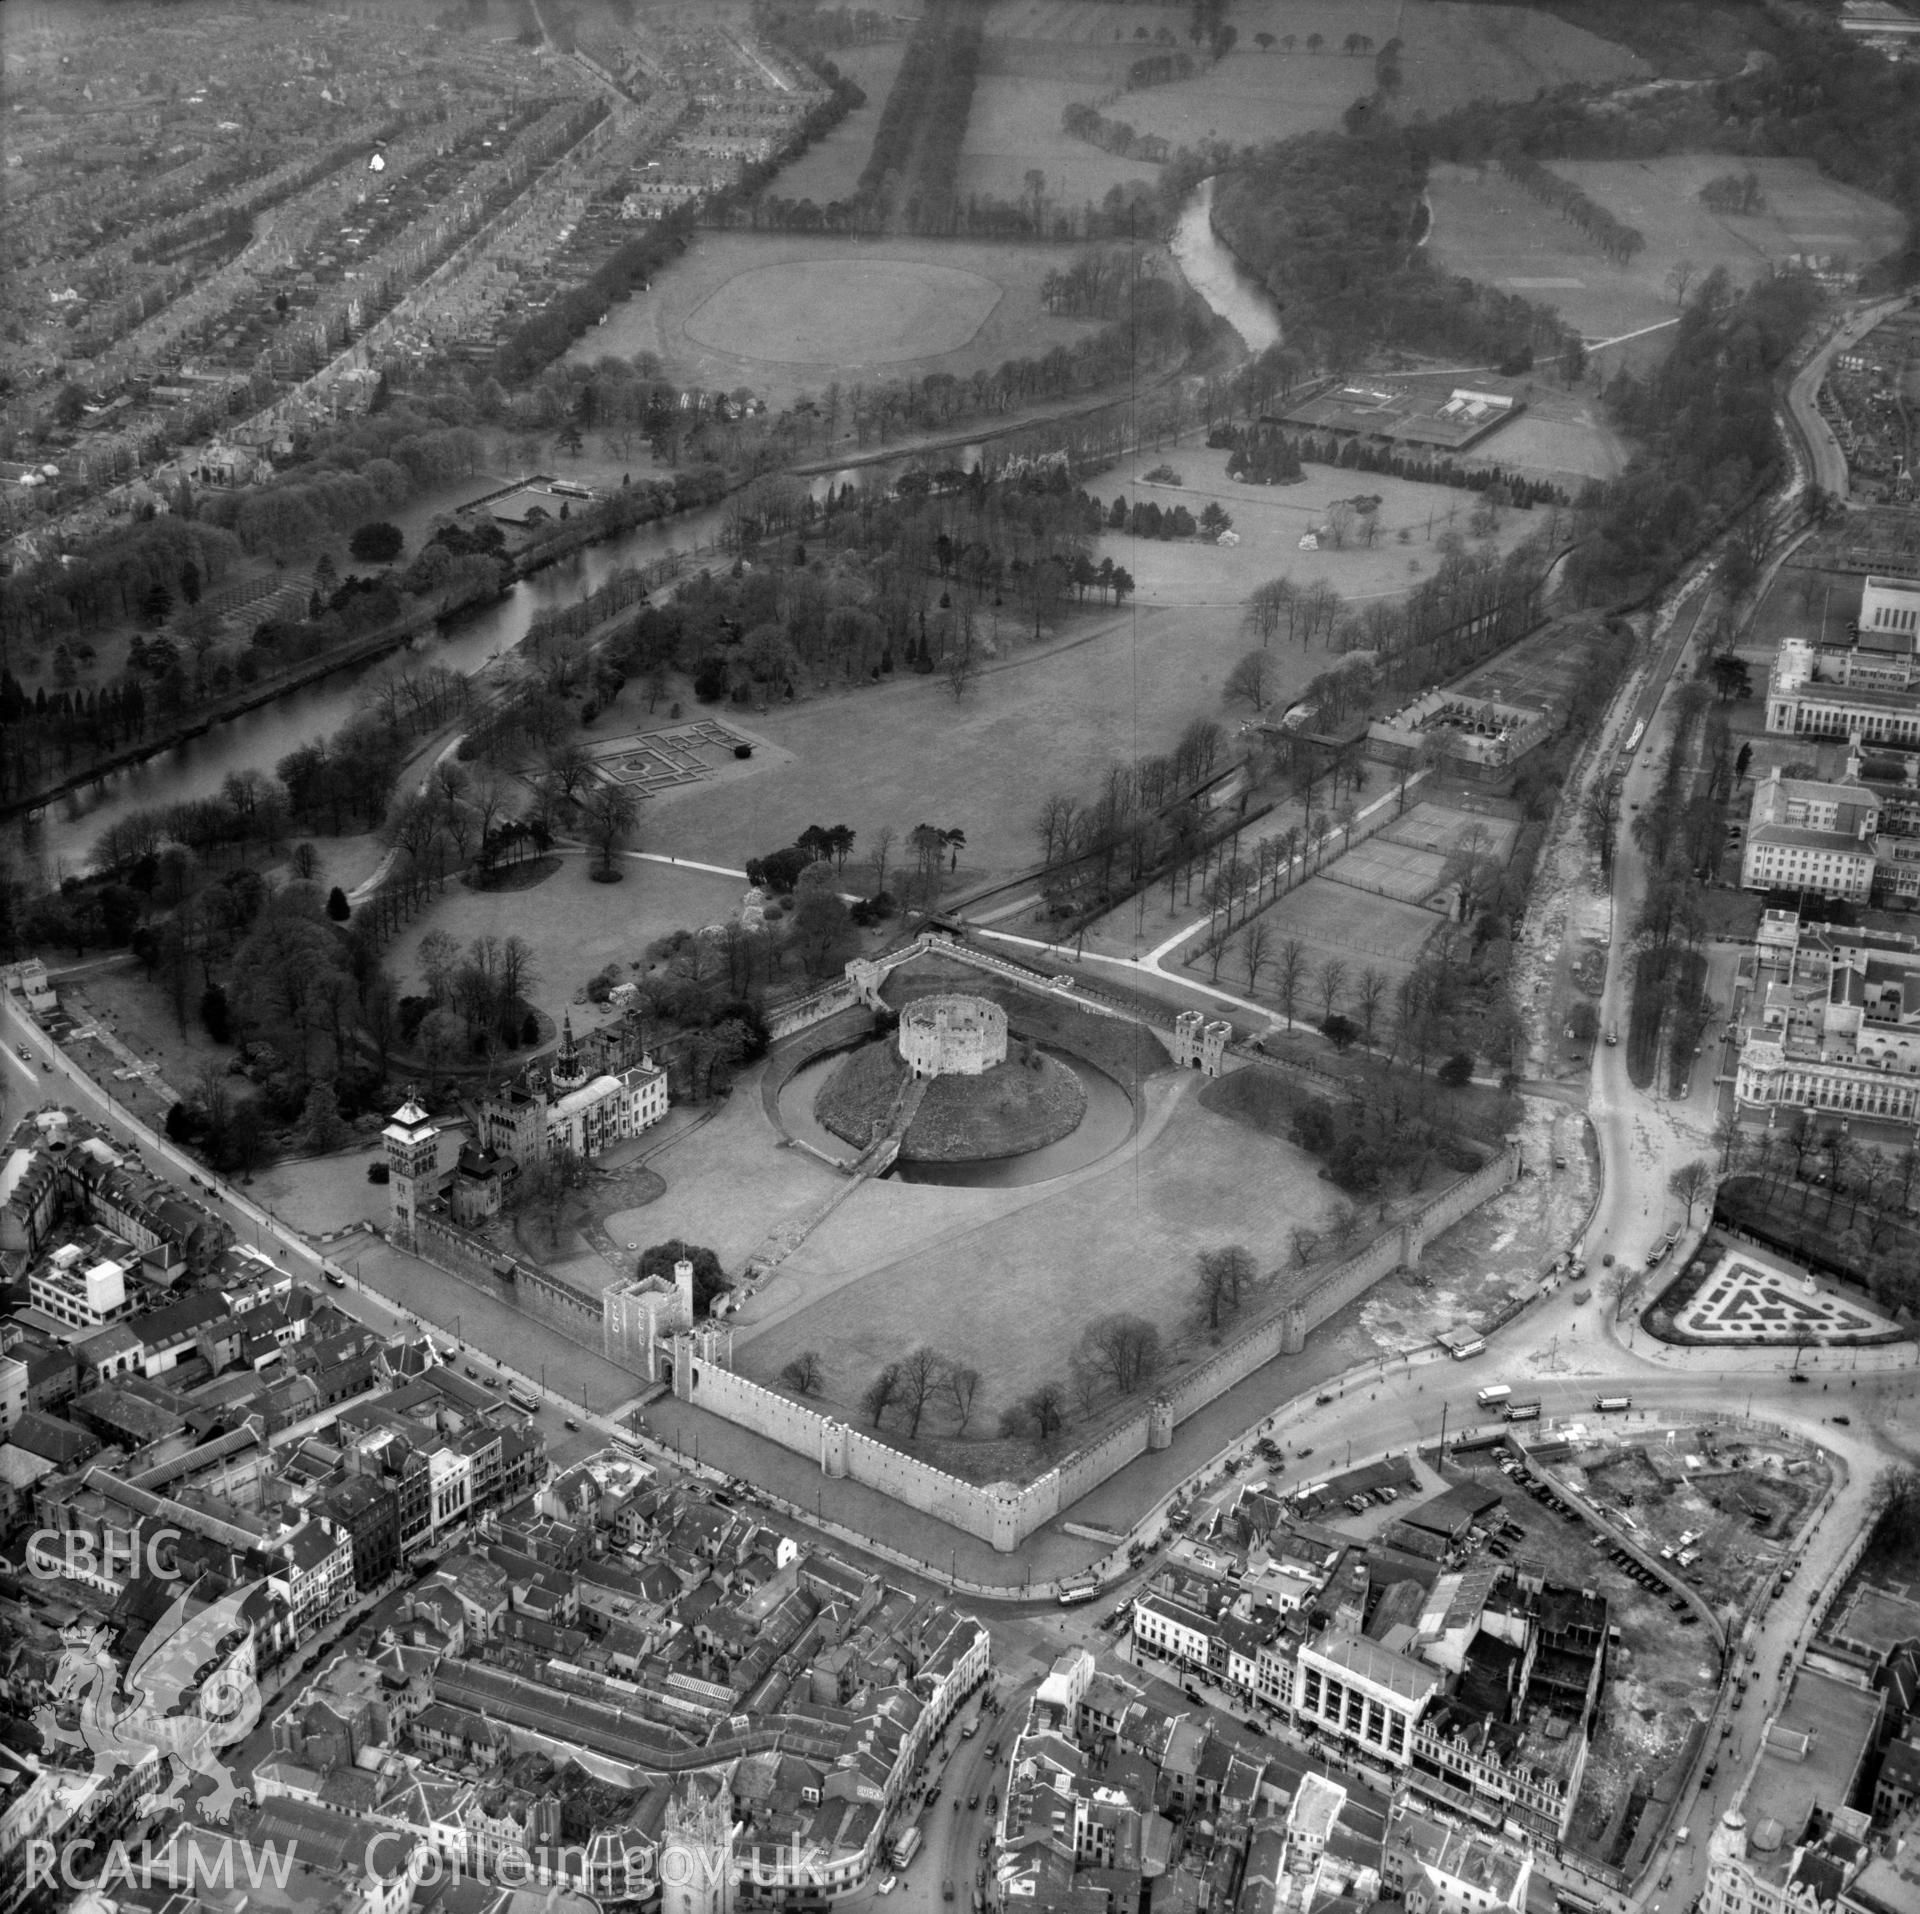 View of Cardiff showing castle and Bute Park